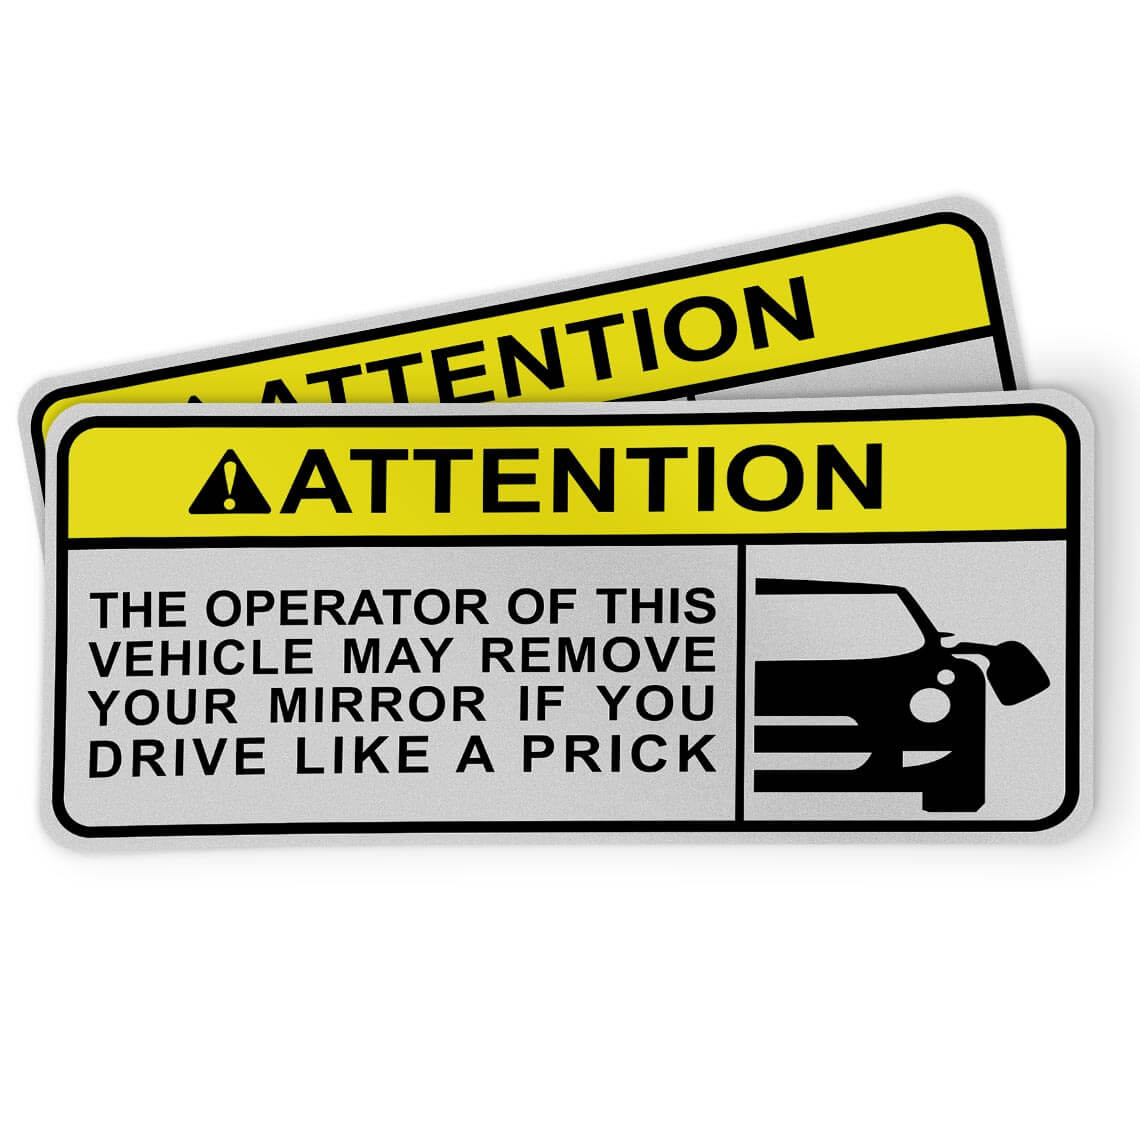 Funny Motorcycle Sticker - Attention - The operator of this vehicle may remove your mirror if you drive like a prick